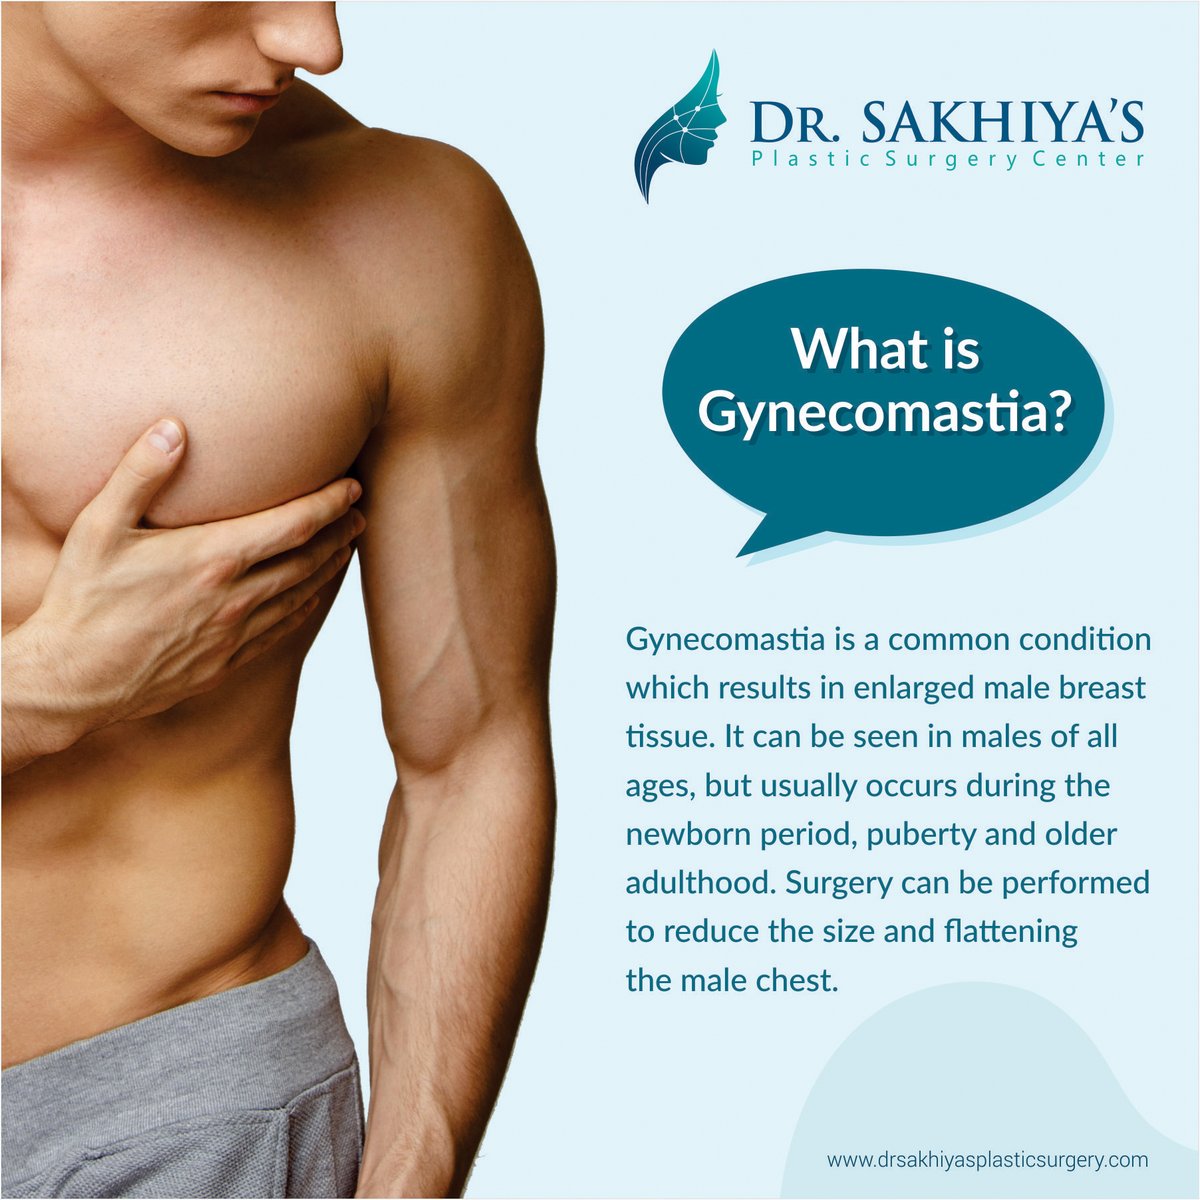 Gynecomastia is a condition that causes enlargement of male breast tissue. It is often a great source of shame and embarrassment for men.
__
#drsakhiyasplasticsurgery  #skinremoval #plasticsurgery #plasticsurgeons #gynecomastia #reducemalebreast #breastreduction #malebreast